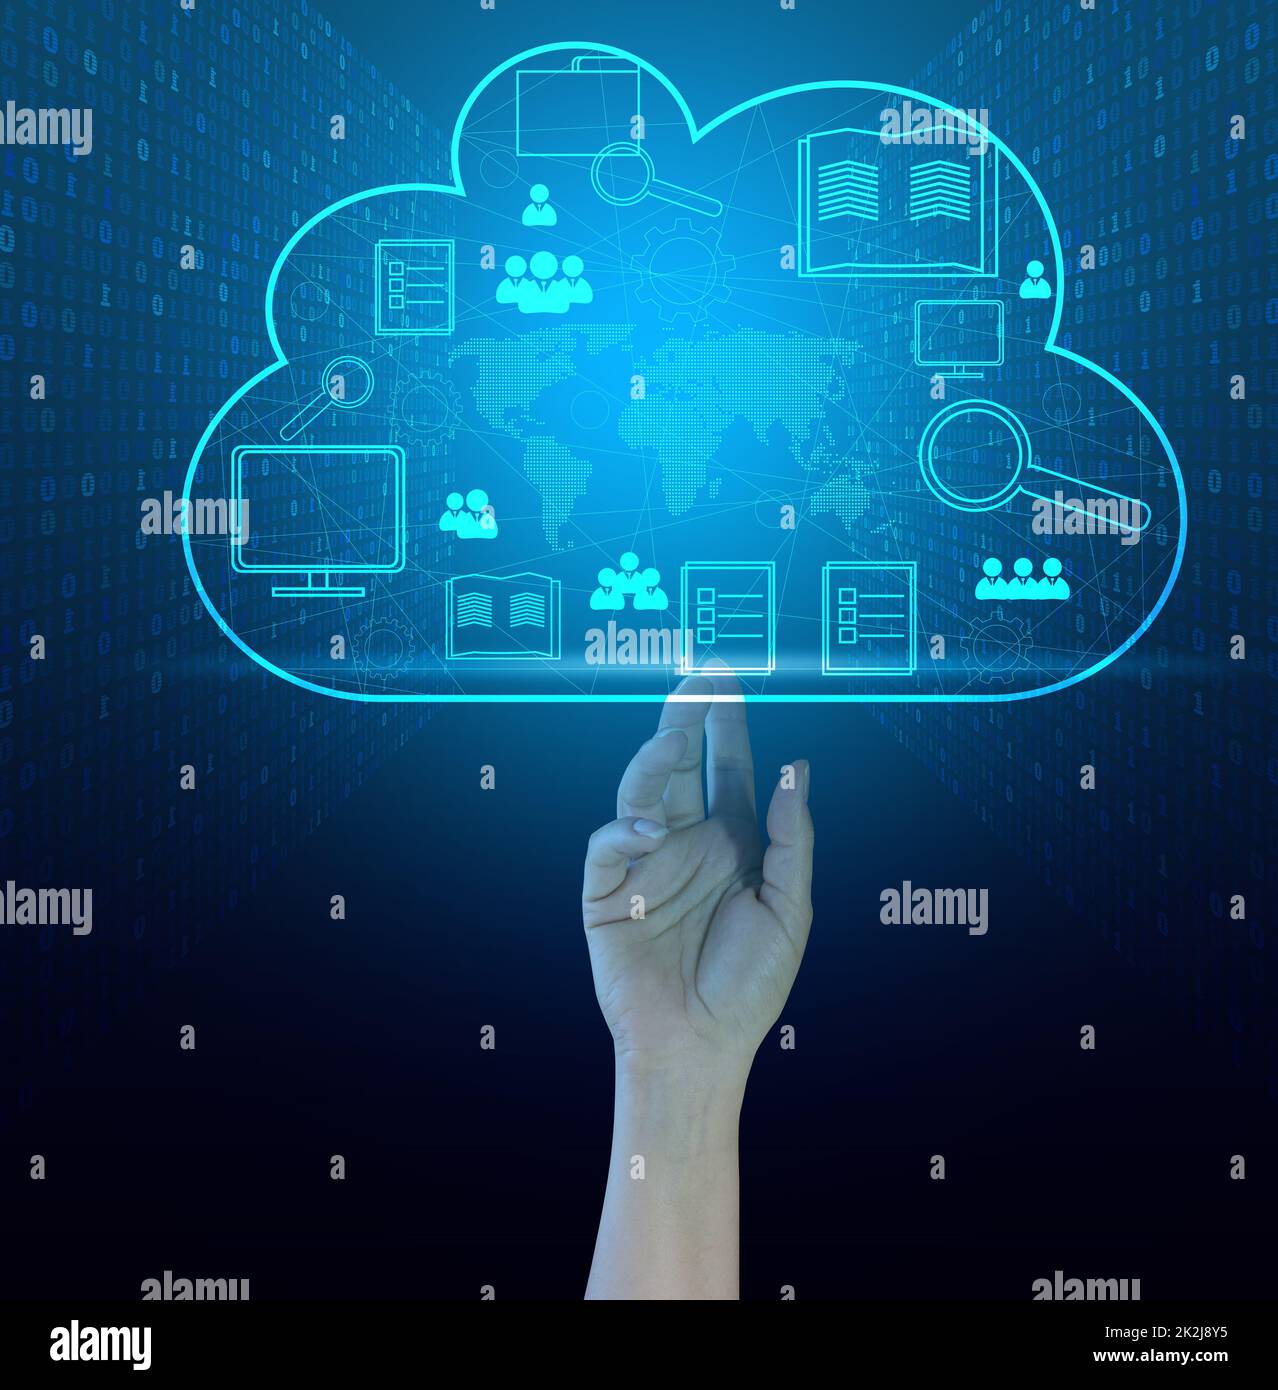 Cloud data storage and businessman's hand. Information exchange and secure data storage. Cloud server and high technology Stock Photo